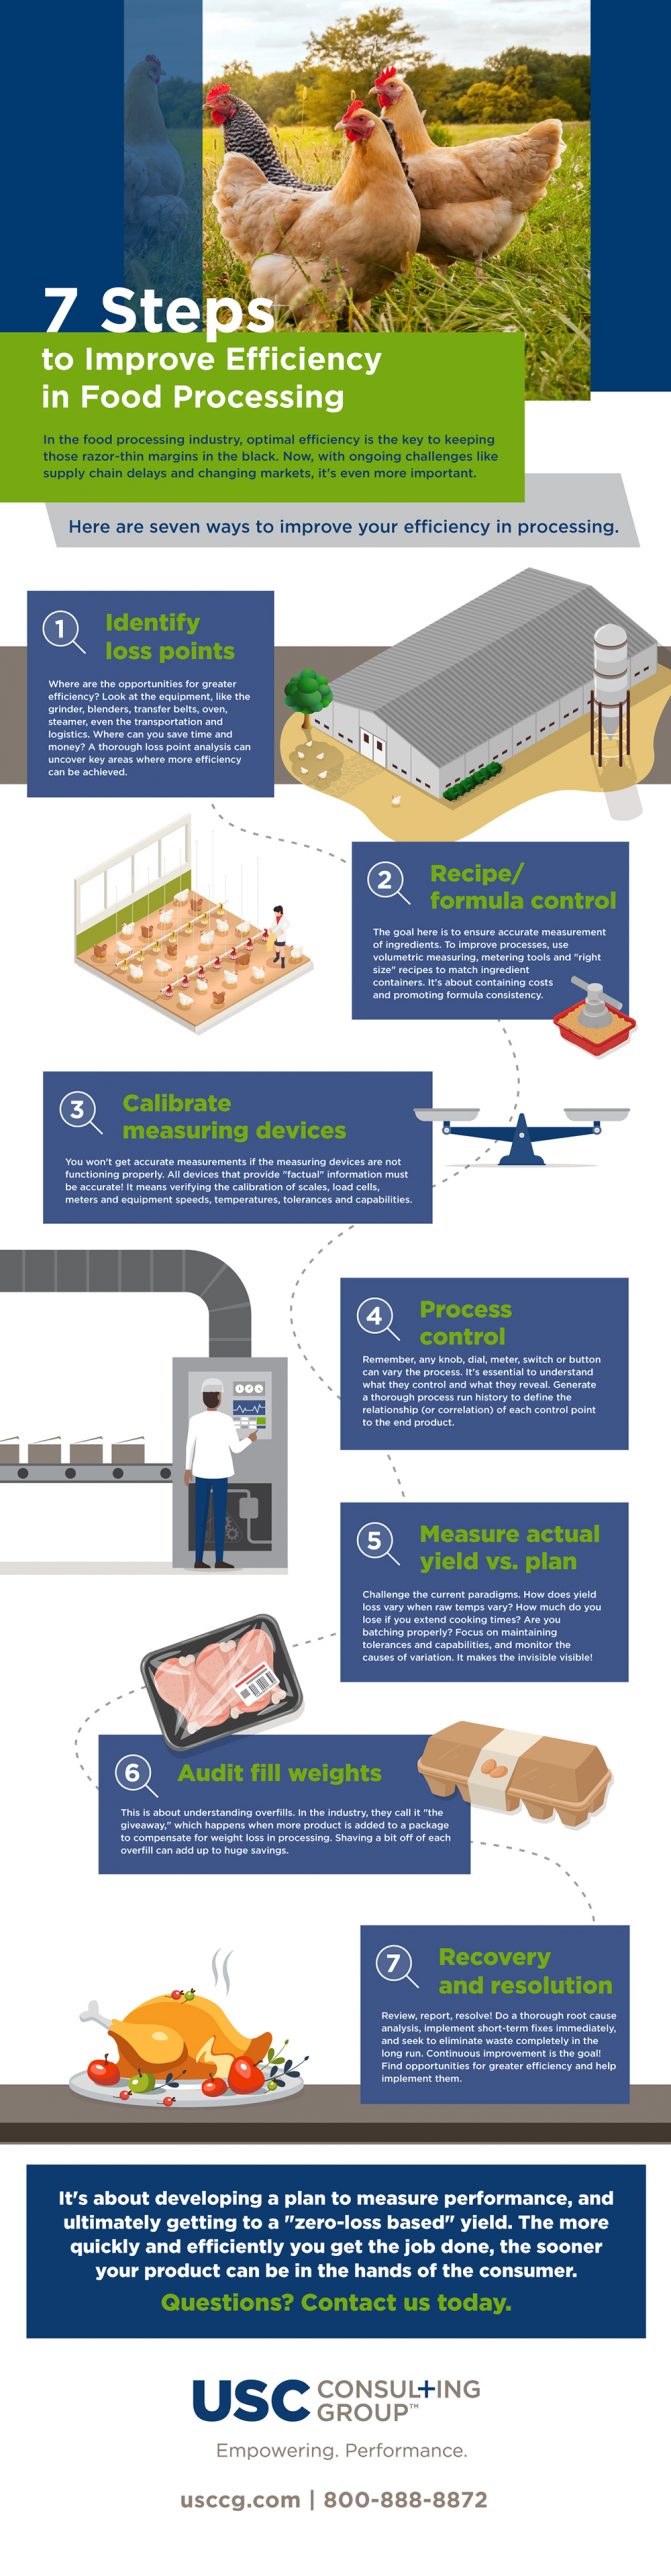 7 Steps to Improve Efficiency in Food Processing Infographic